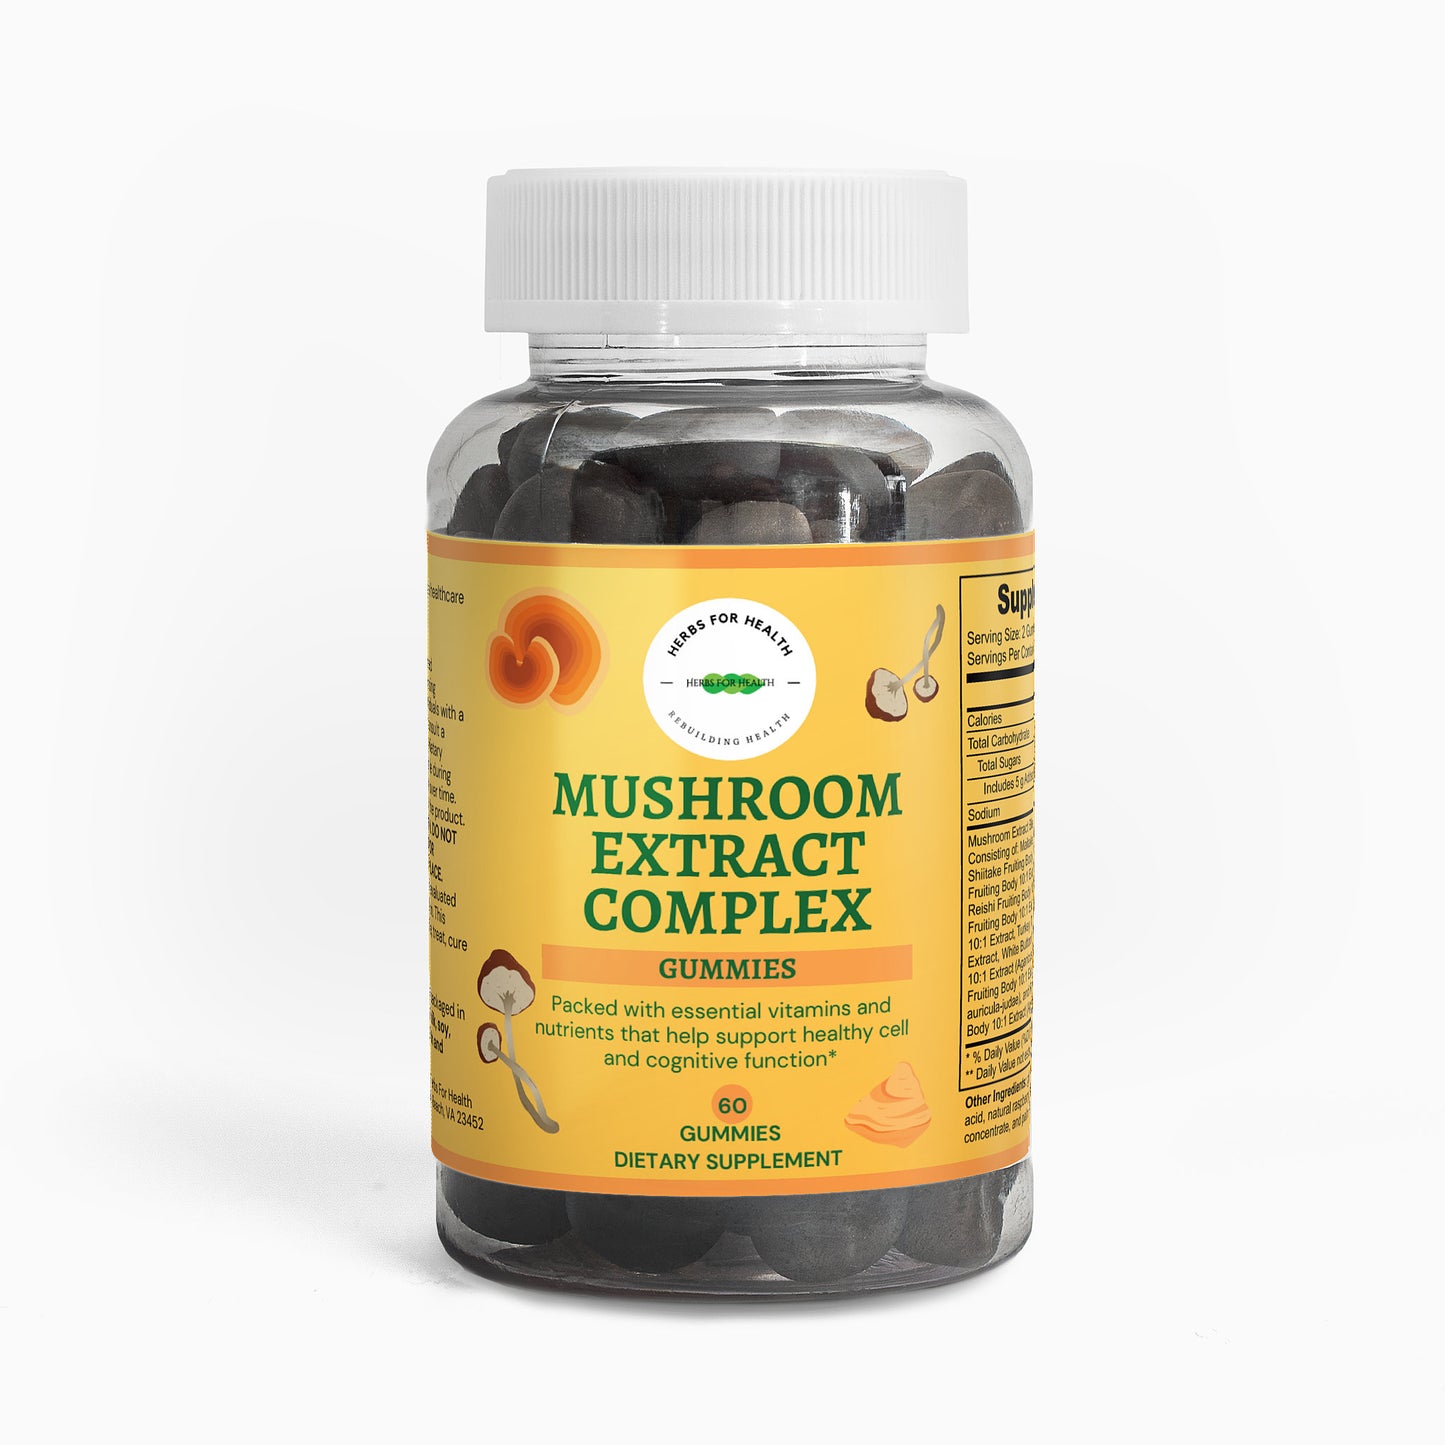 Mushroom Extract Complex - Herbs For Health